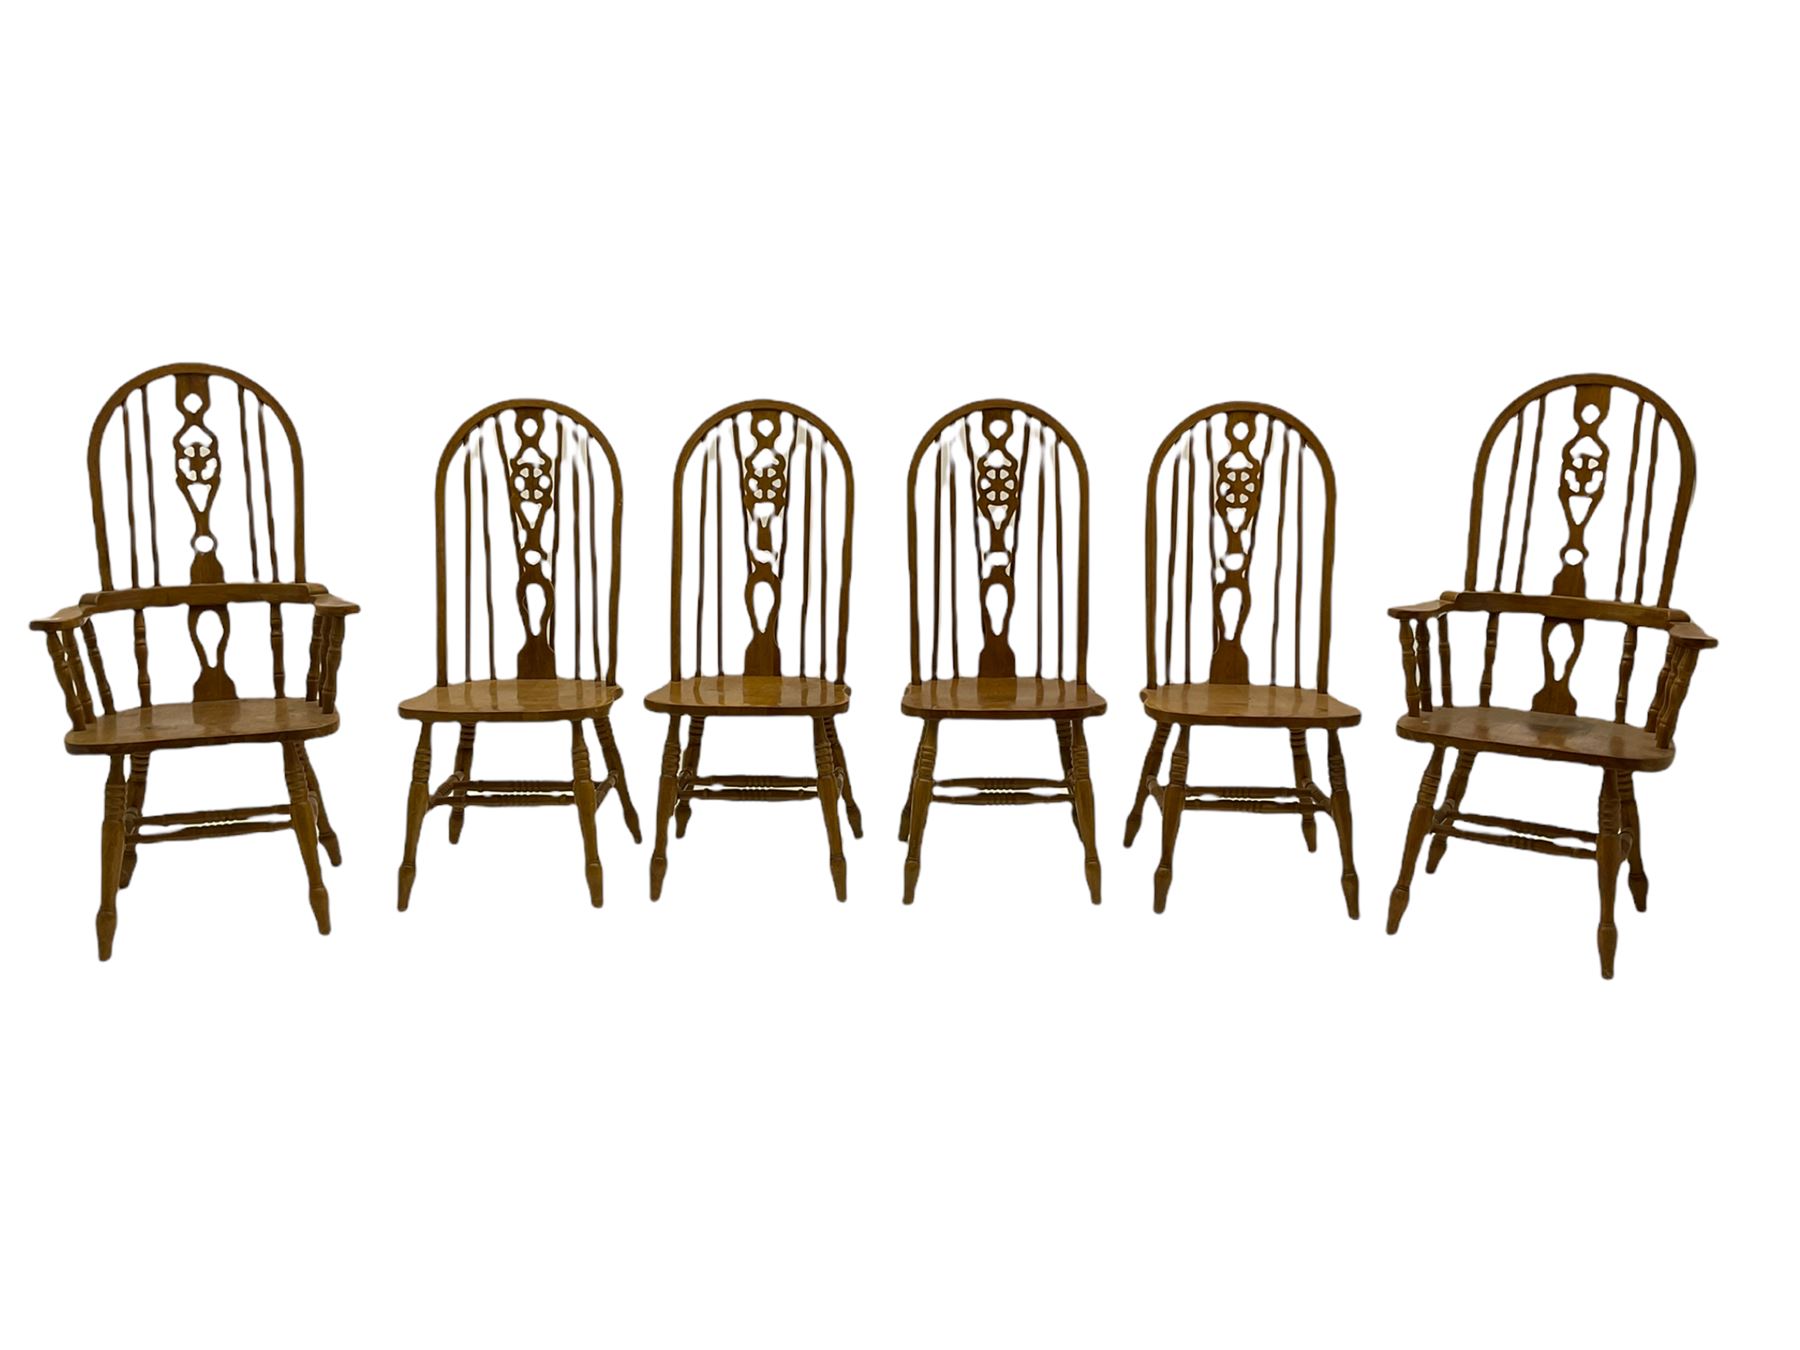 Set of six lightwood Windsor style dining chairs - Image 12 of 12